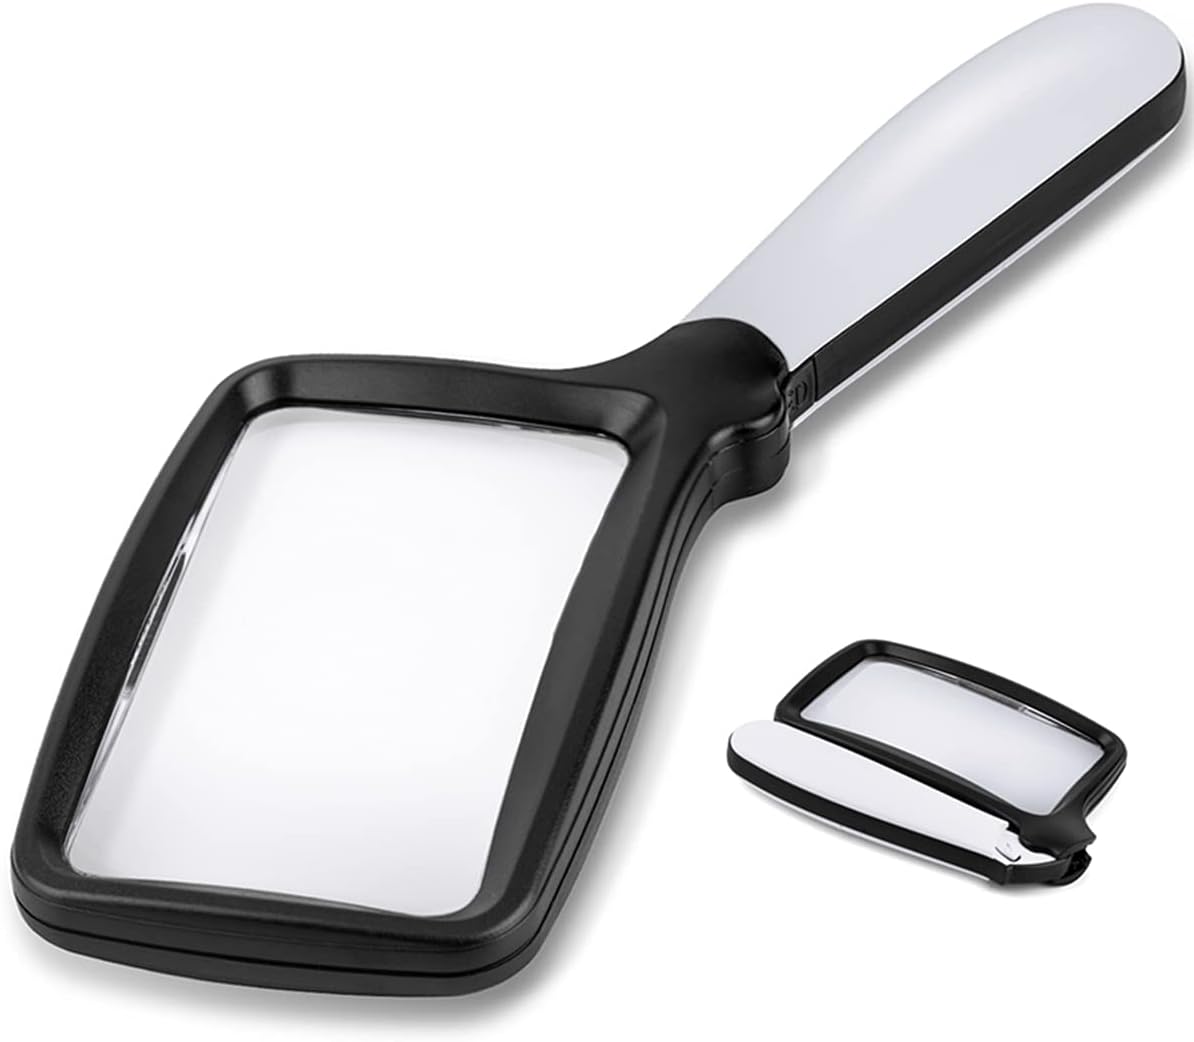 3x Rectangular LED Magnifier with Stand, Rechargeable Battery